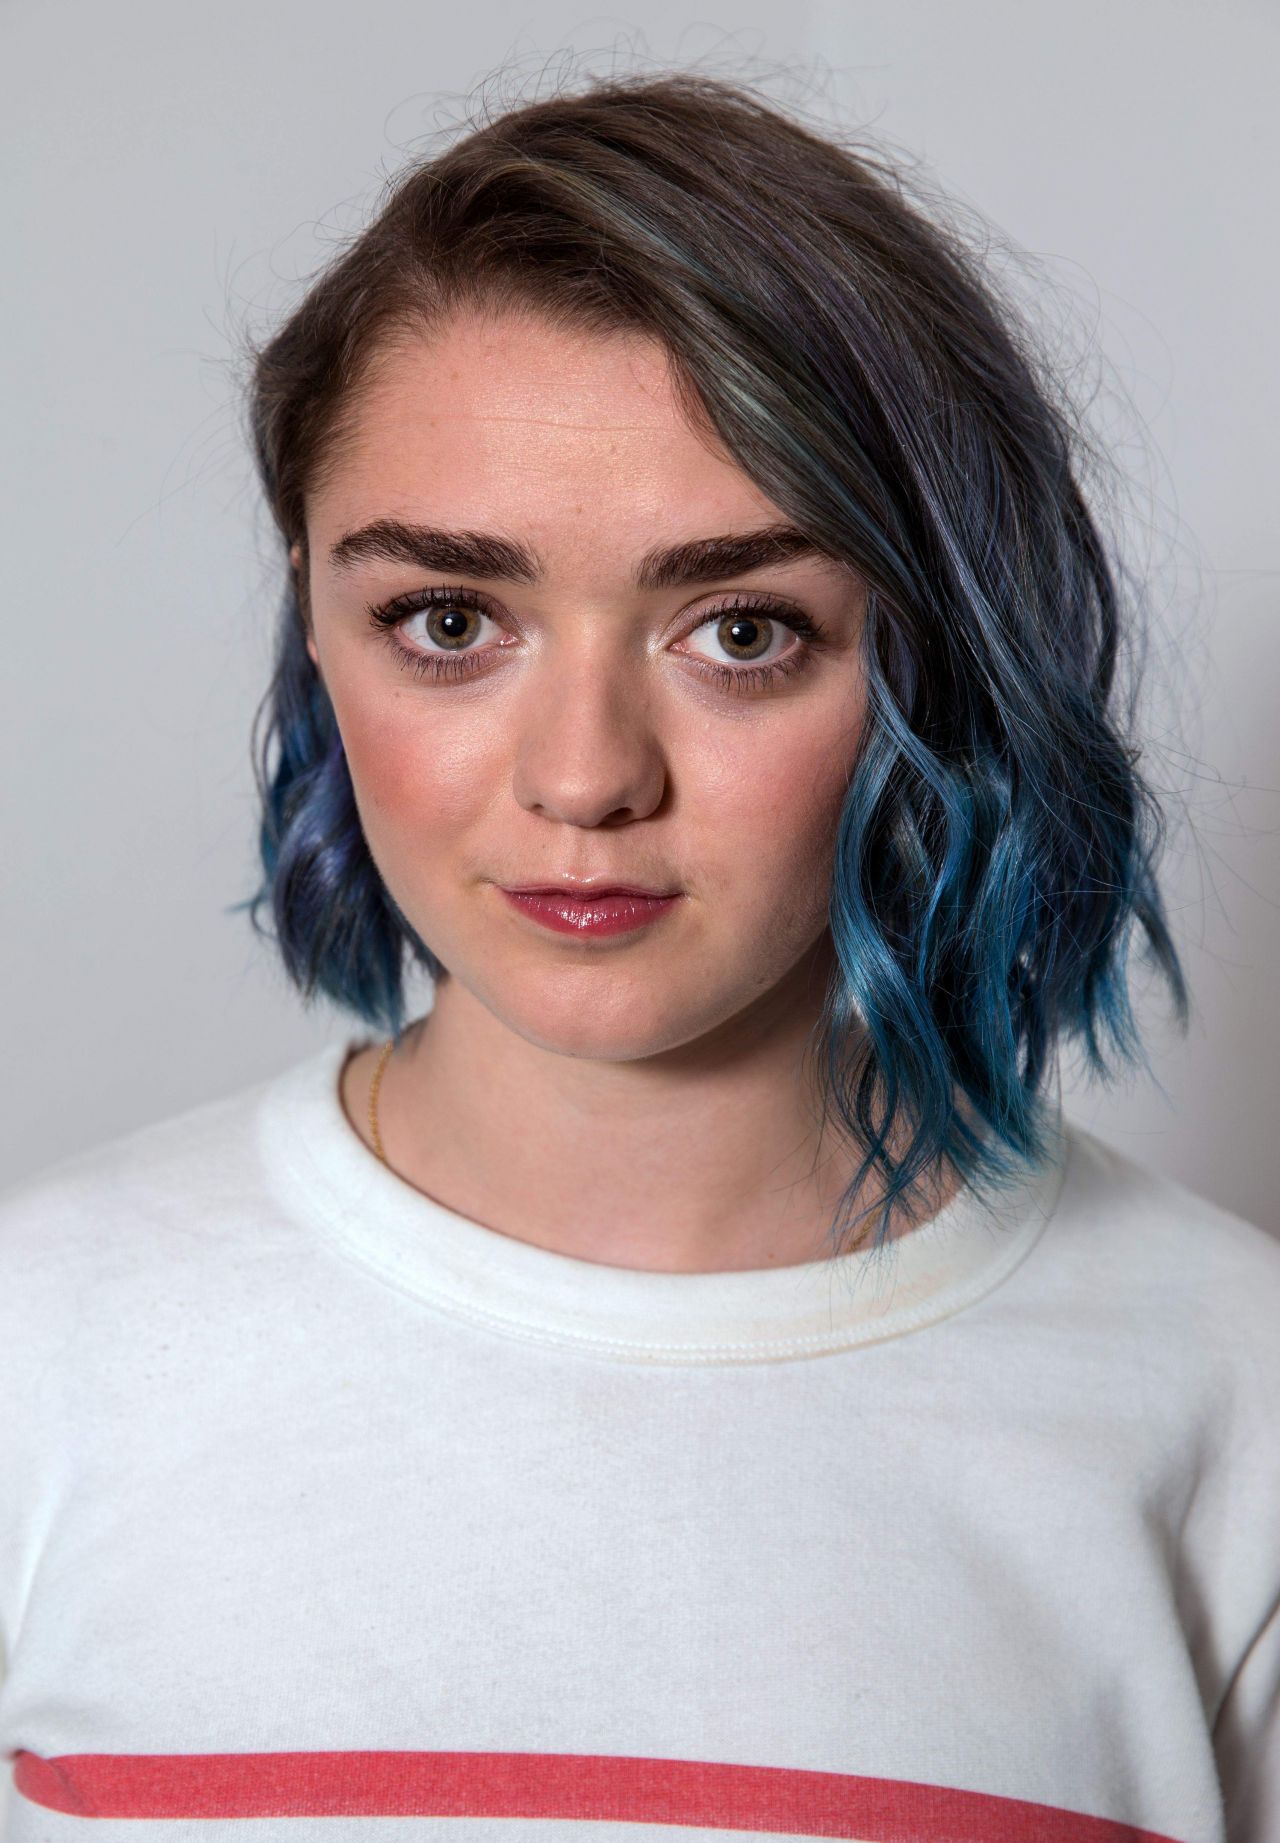 Maisie Williams Images - Management And Leadership